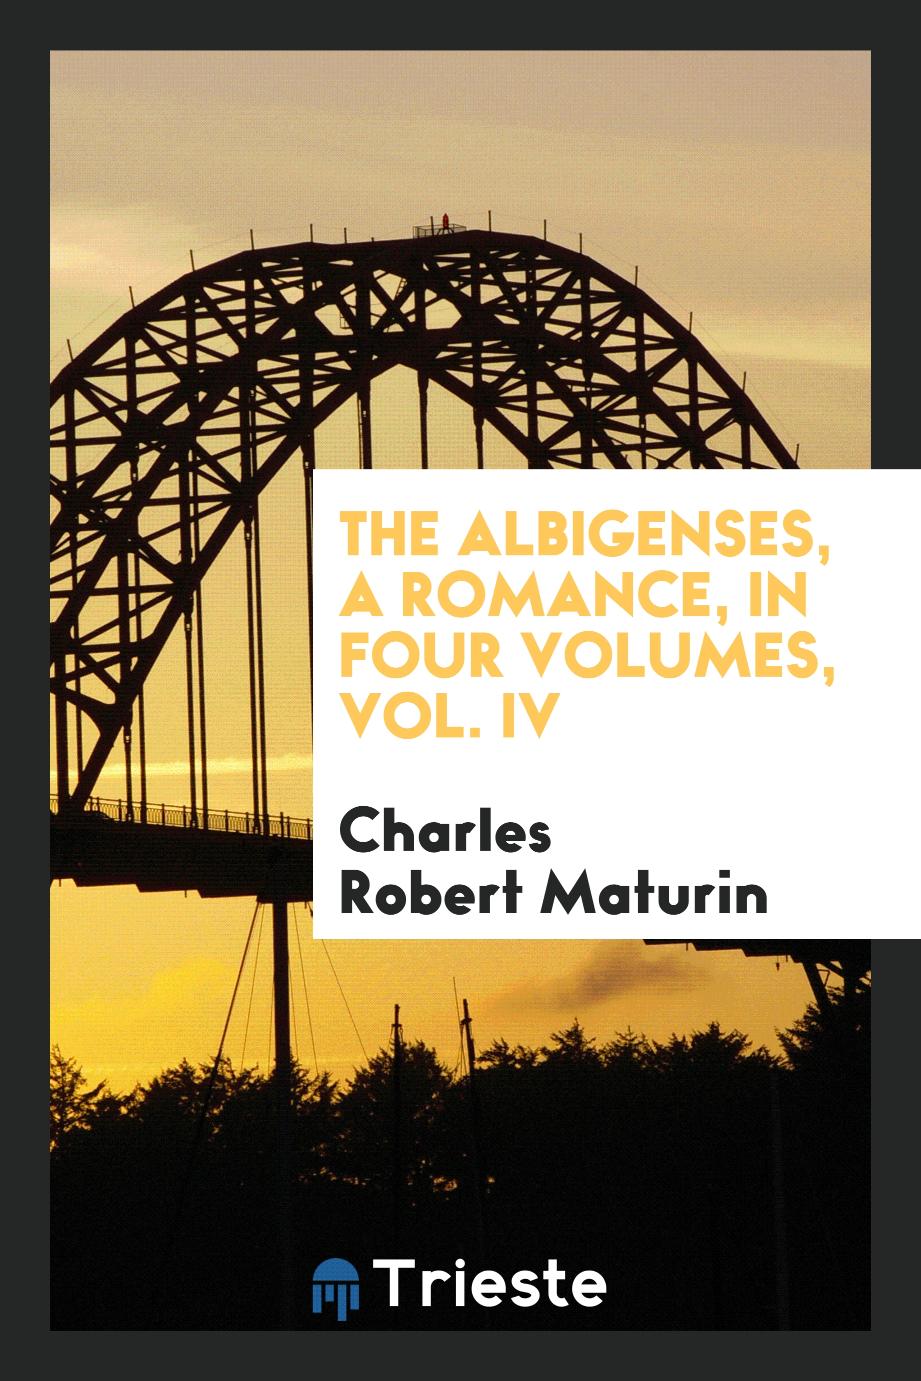 The Albigenses, a romance, in four volumes, Vol. IV